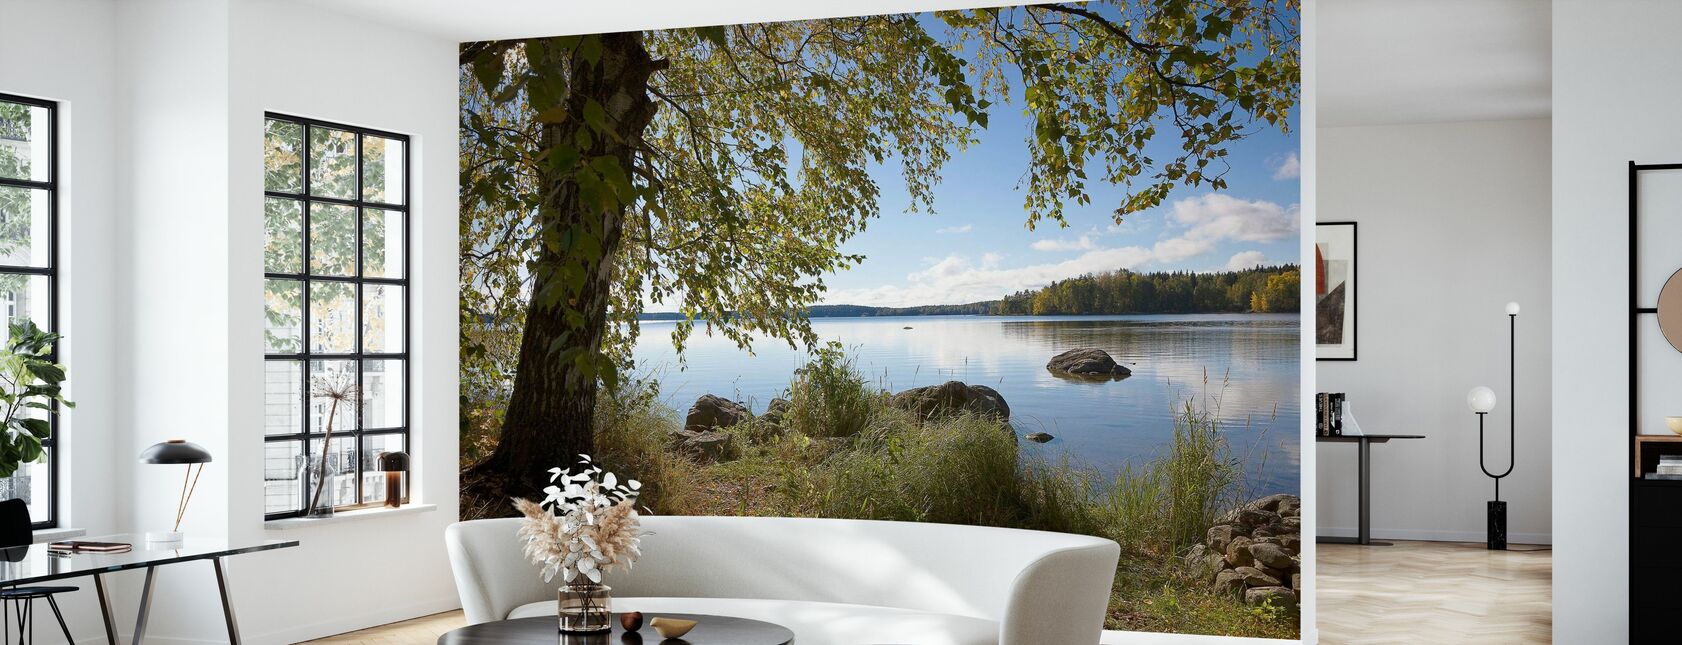 Birch by the Lake - Wallpaper - Living Room